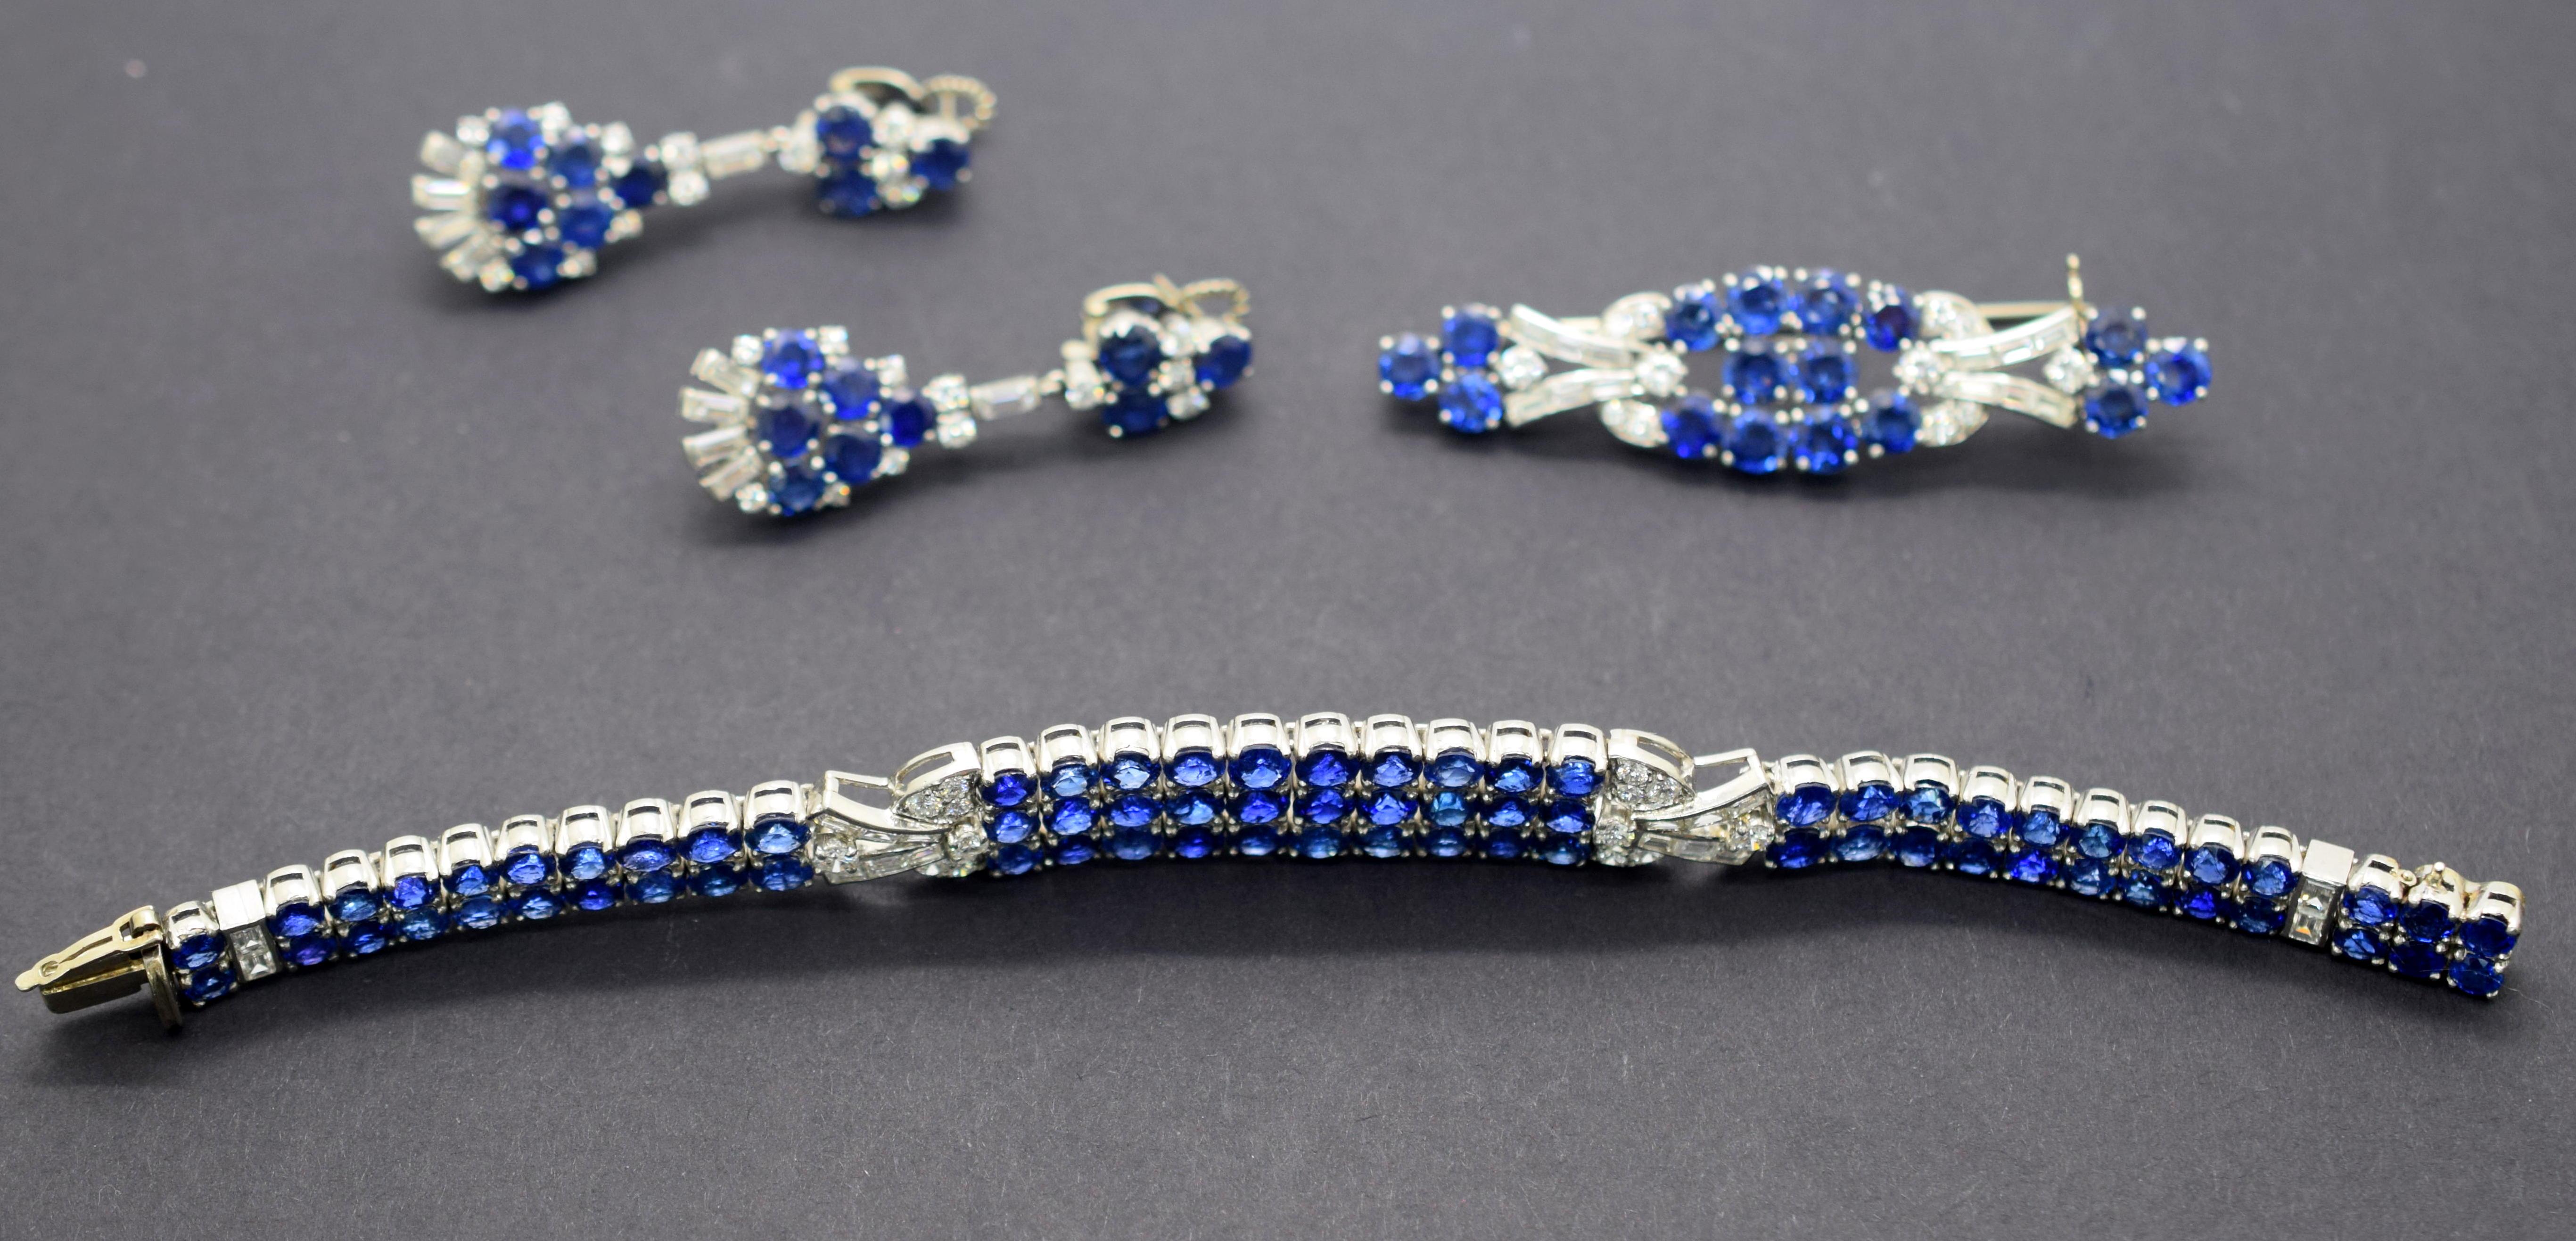 Beautiful Sapphire and Diamond brooch by famed designer Gazdar. This bracelet has a very unique design. The natural Sapphires have a rich blue color all measuring  4.0-4.6 x 2.55 mm to 4.7-4.6 x 3.01 mm  seventy seven (77) stones in total. These